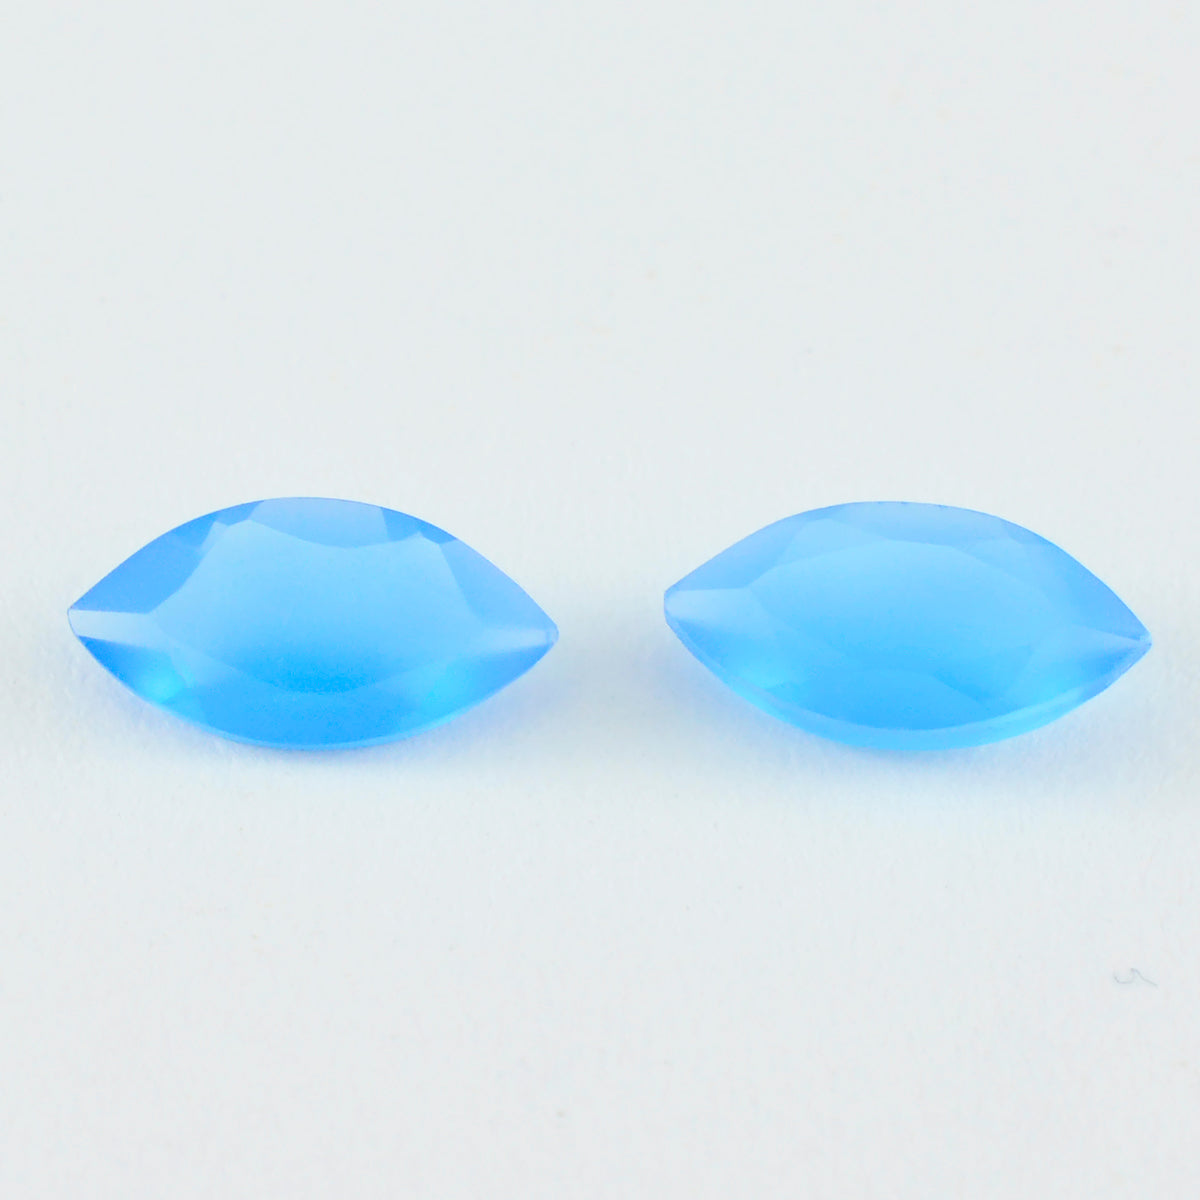 Riyogems 1PC Real Blue Chalcedony Faceted 11x22 mm Marquise Shape beautiful Quality Gemstone